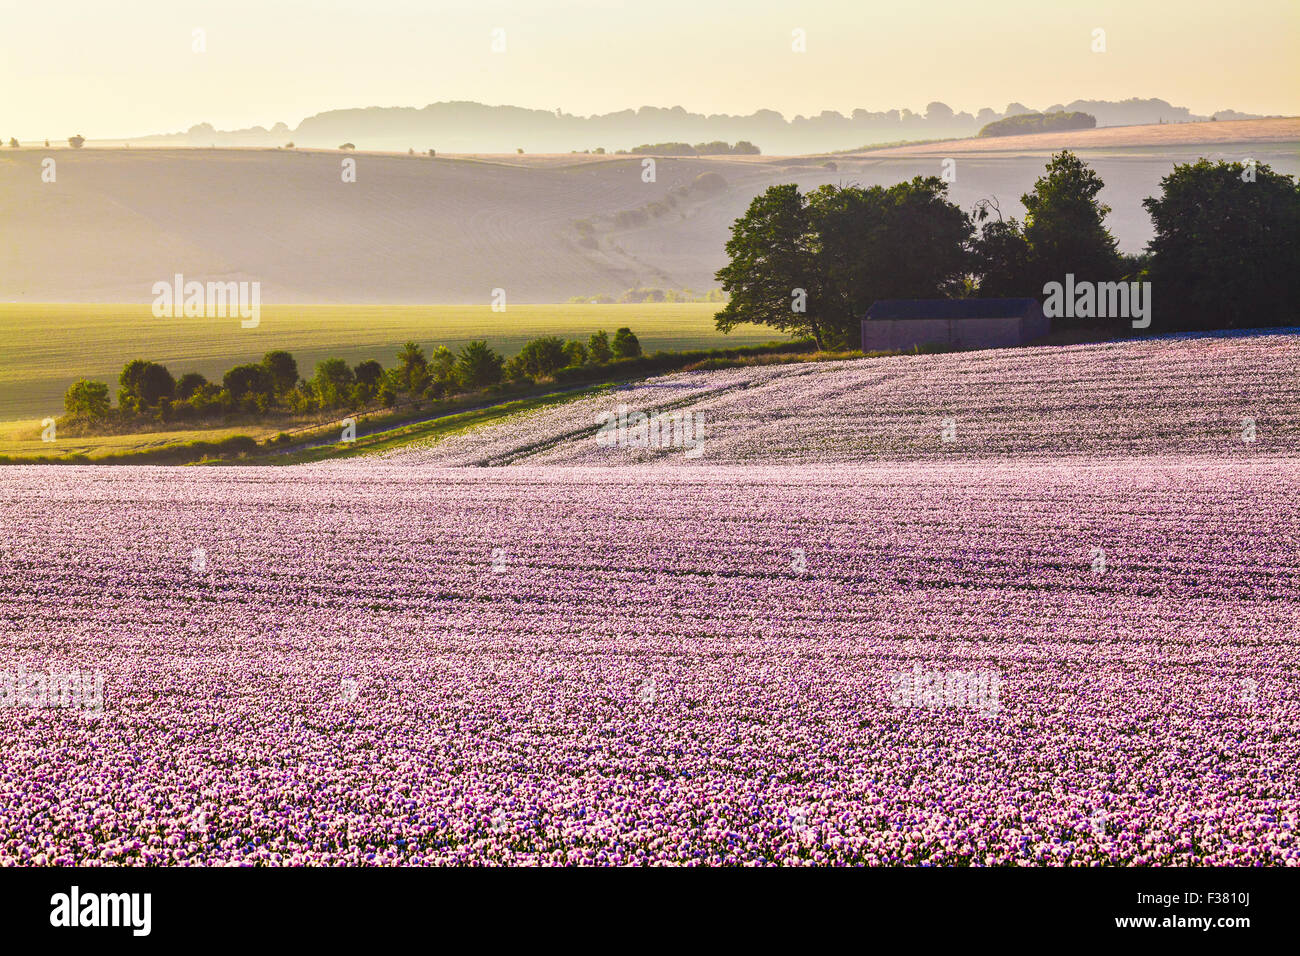 Sunrise over a field of cultivated white poppies on the Marlborough Downs in Wiltshire. Stock Photo